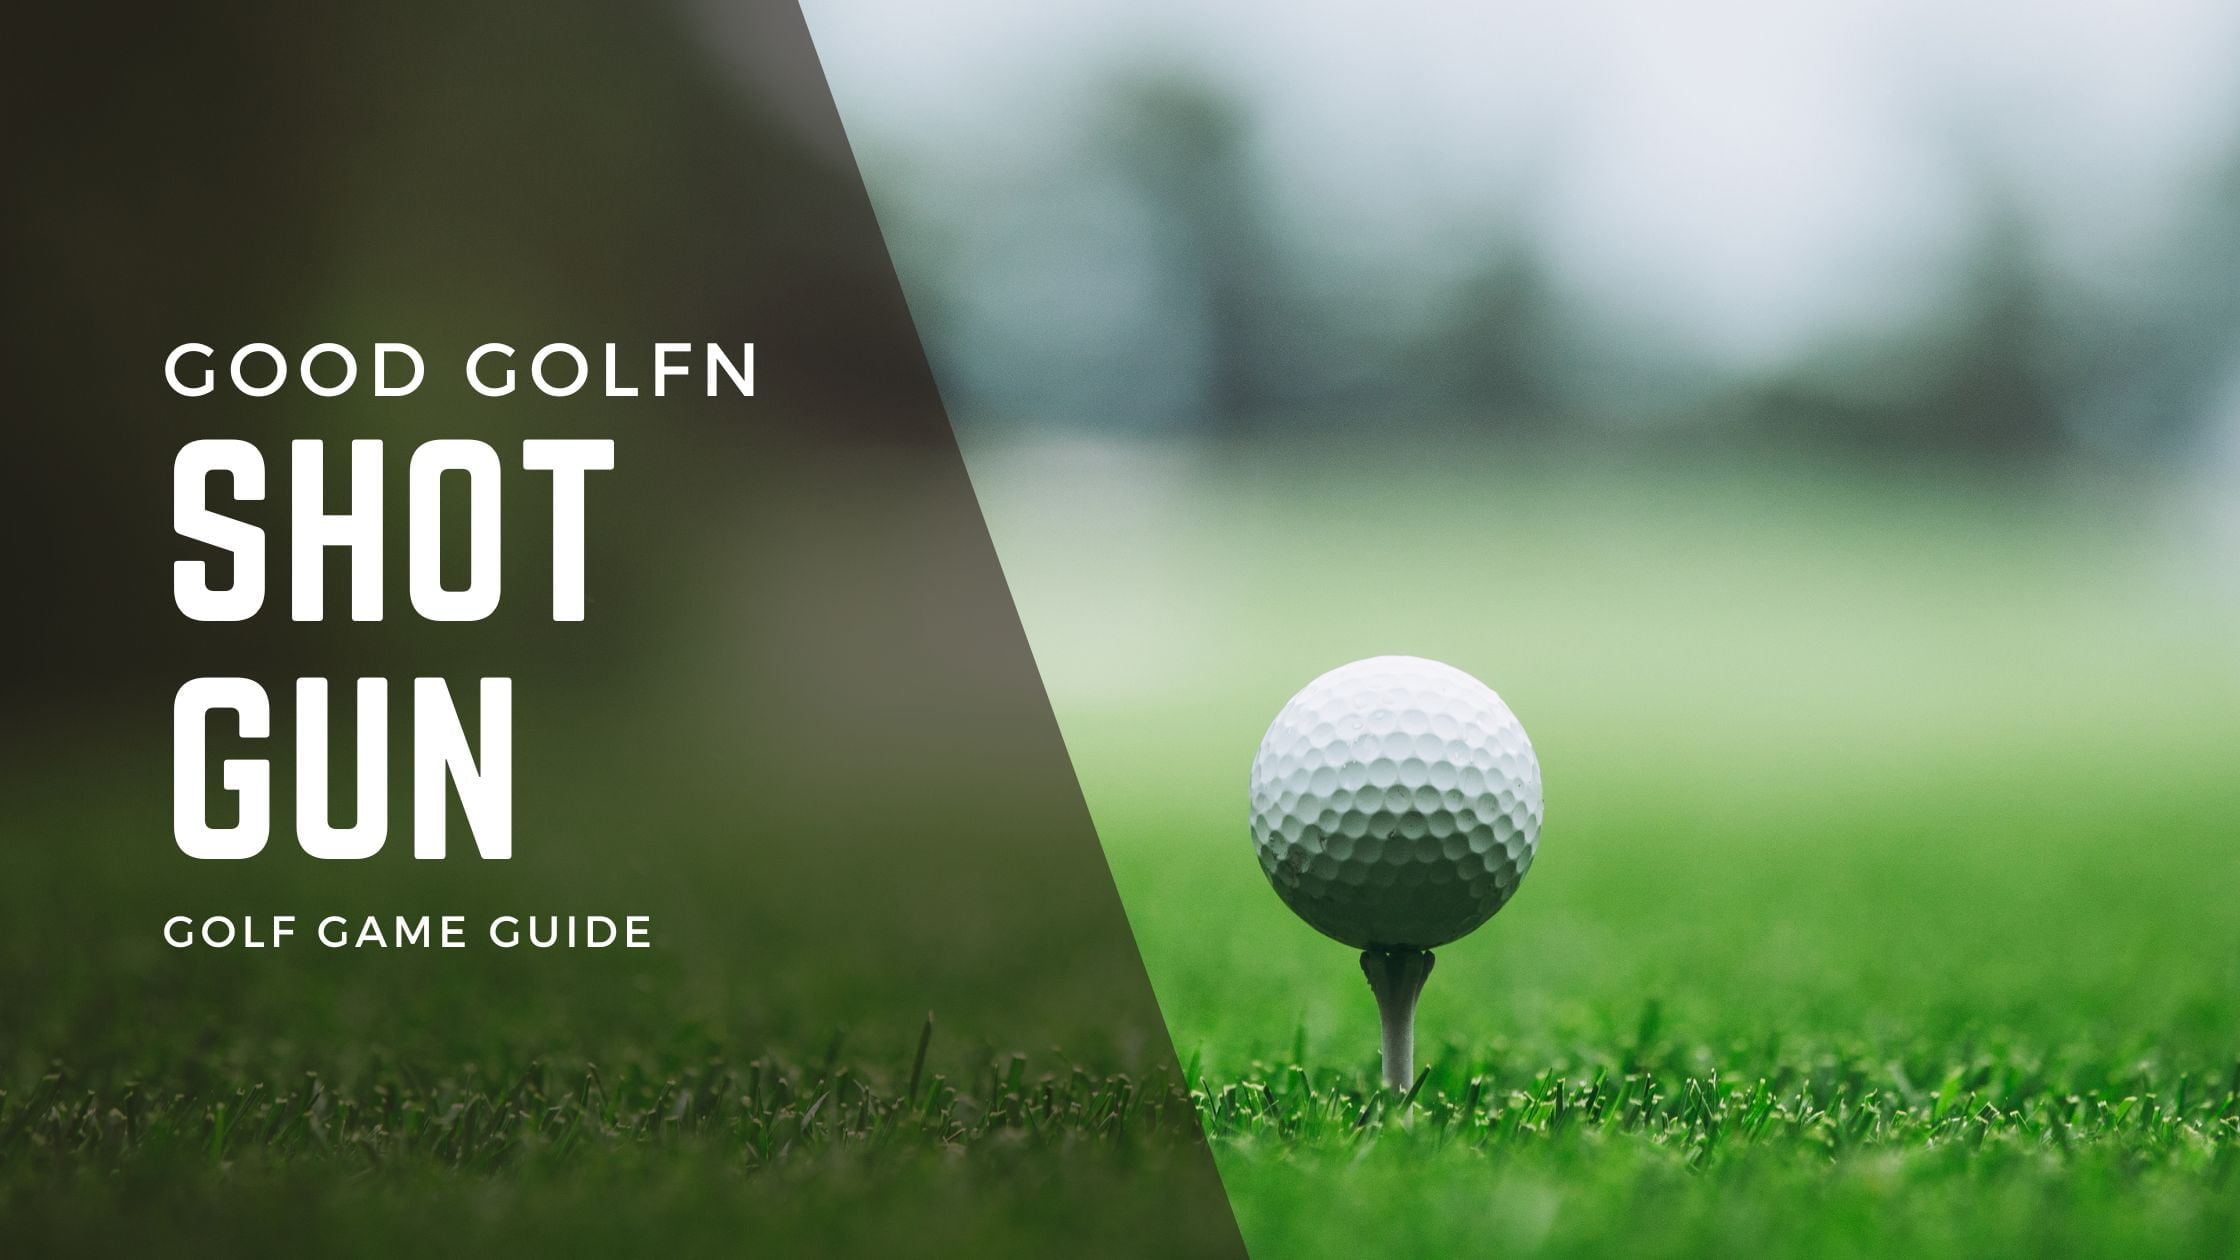 Explore the intricacies of shotgun starts in golf, from its origins to PGA Tour applications. Dive deep into tournament formats and optimize your experience!